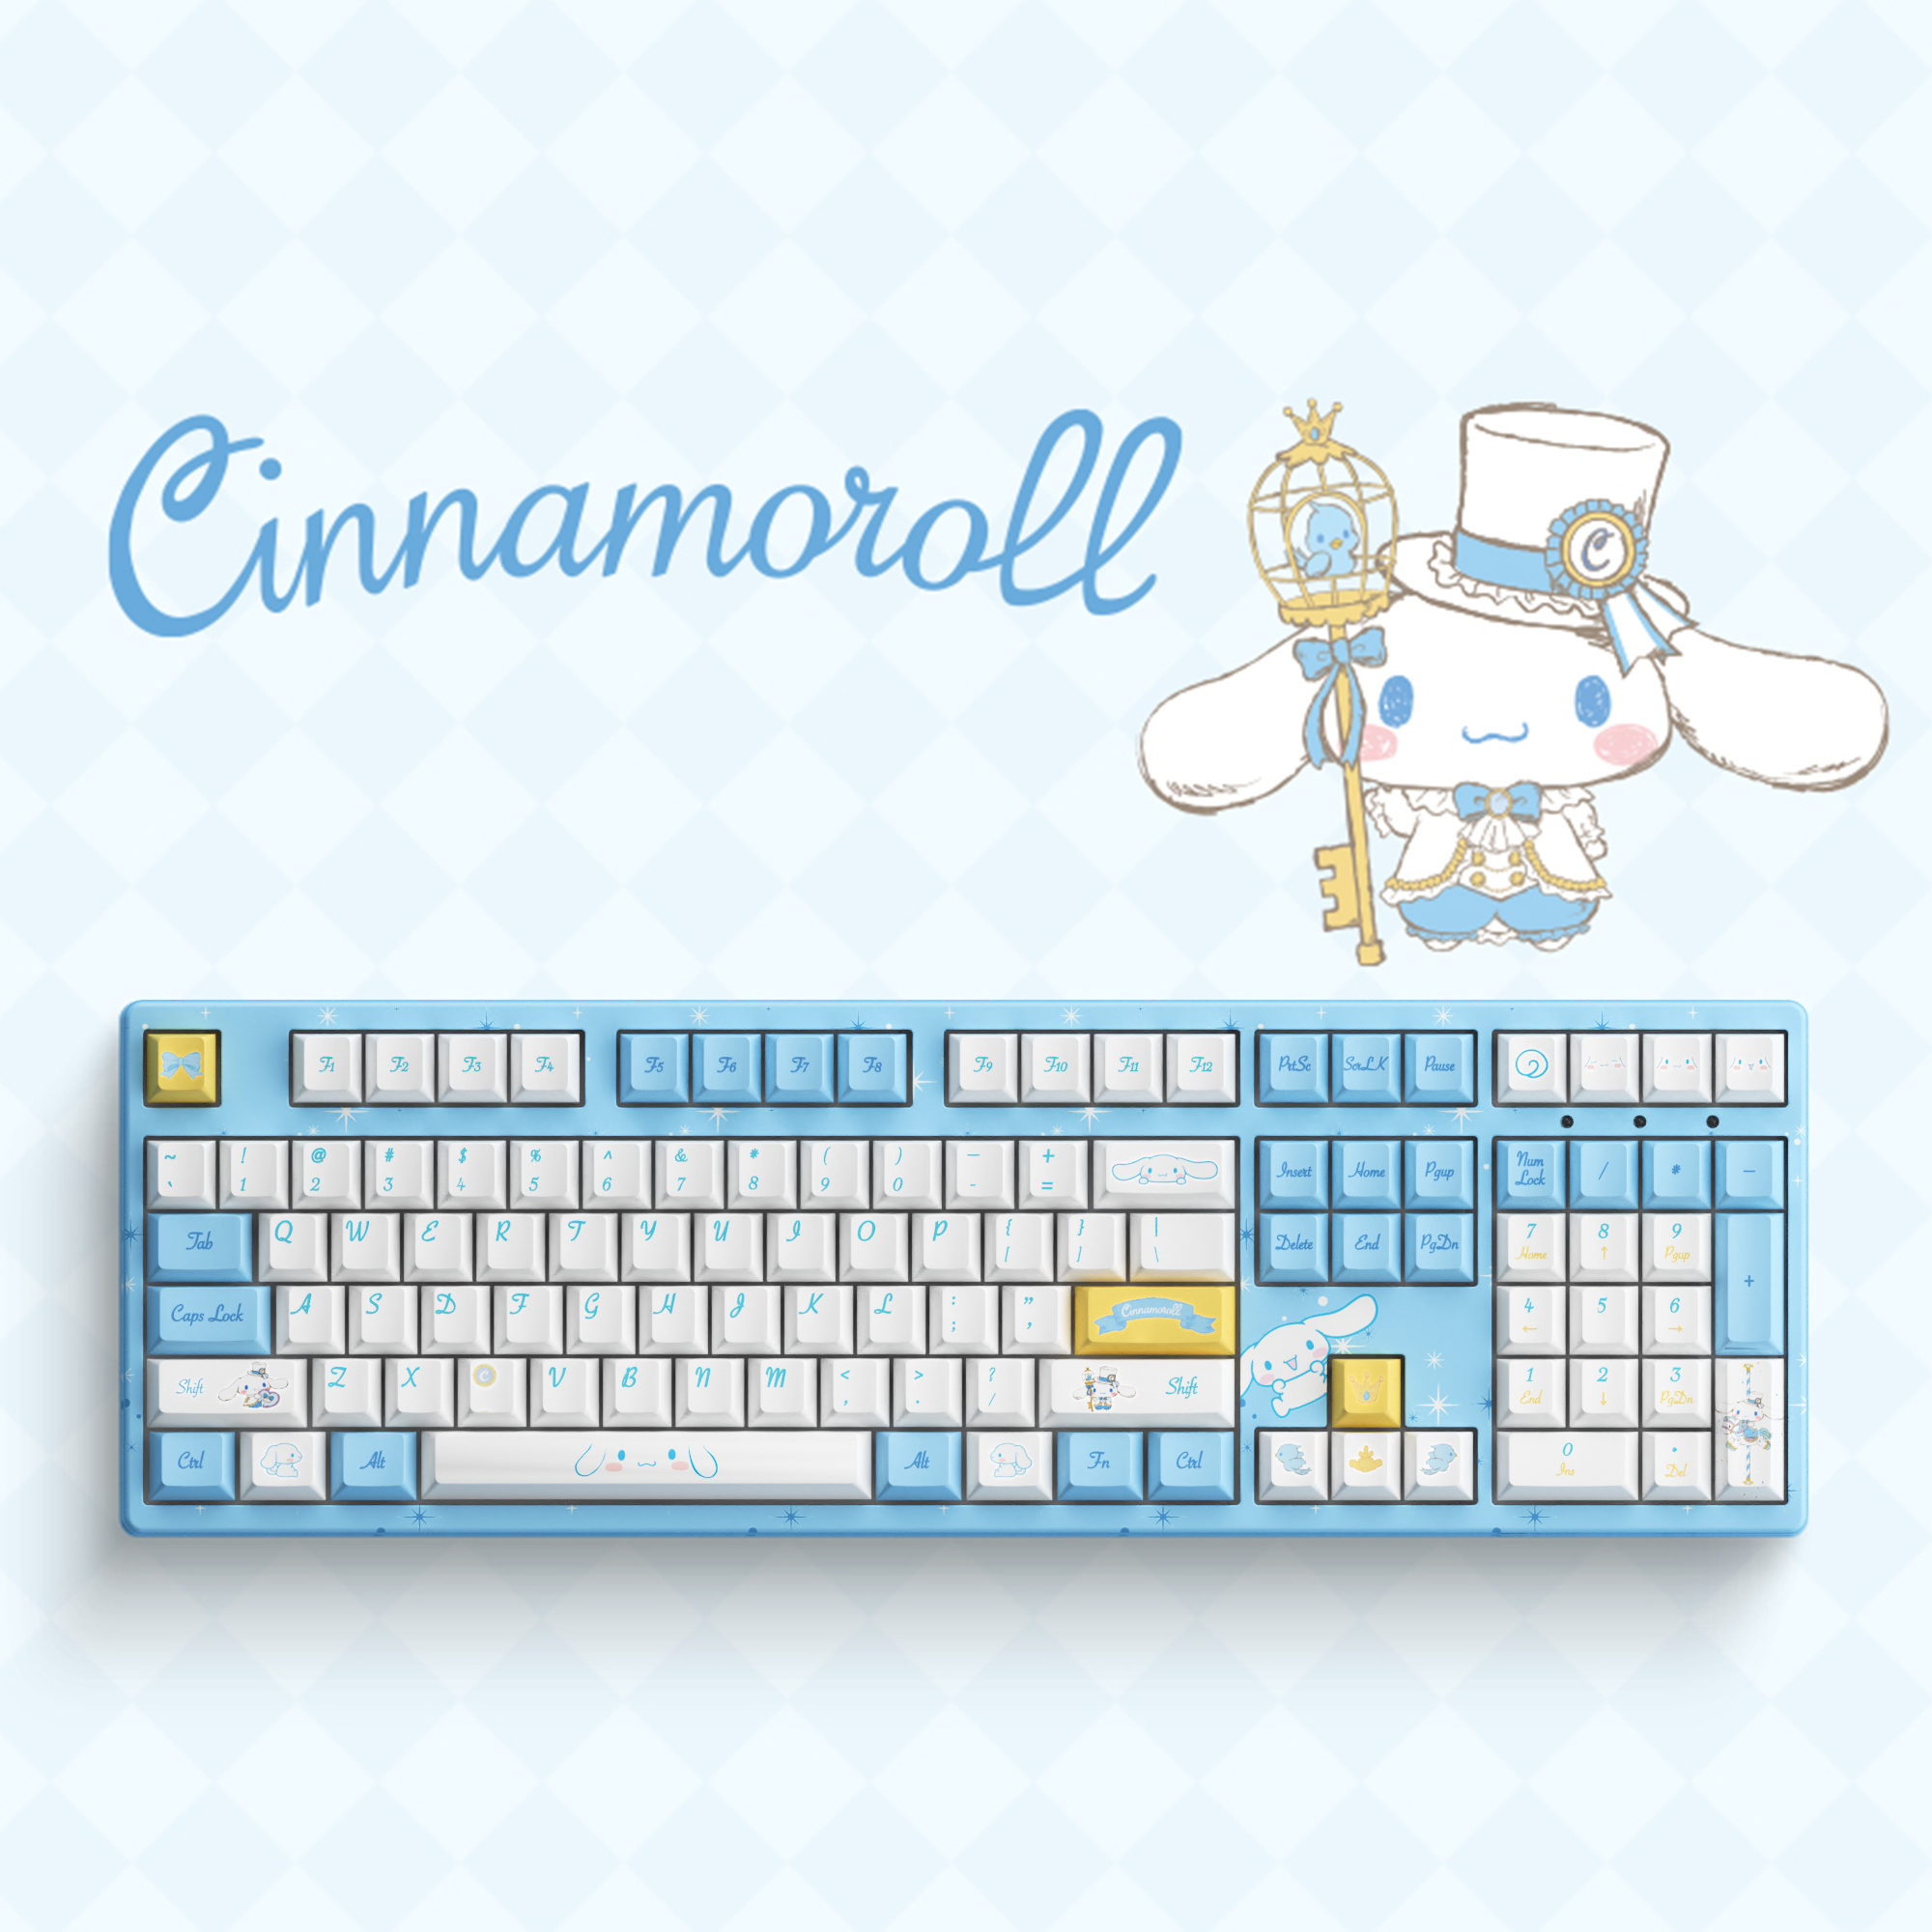 Cannelleroll 3108v2